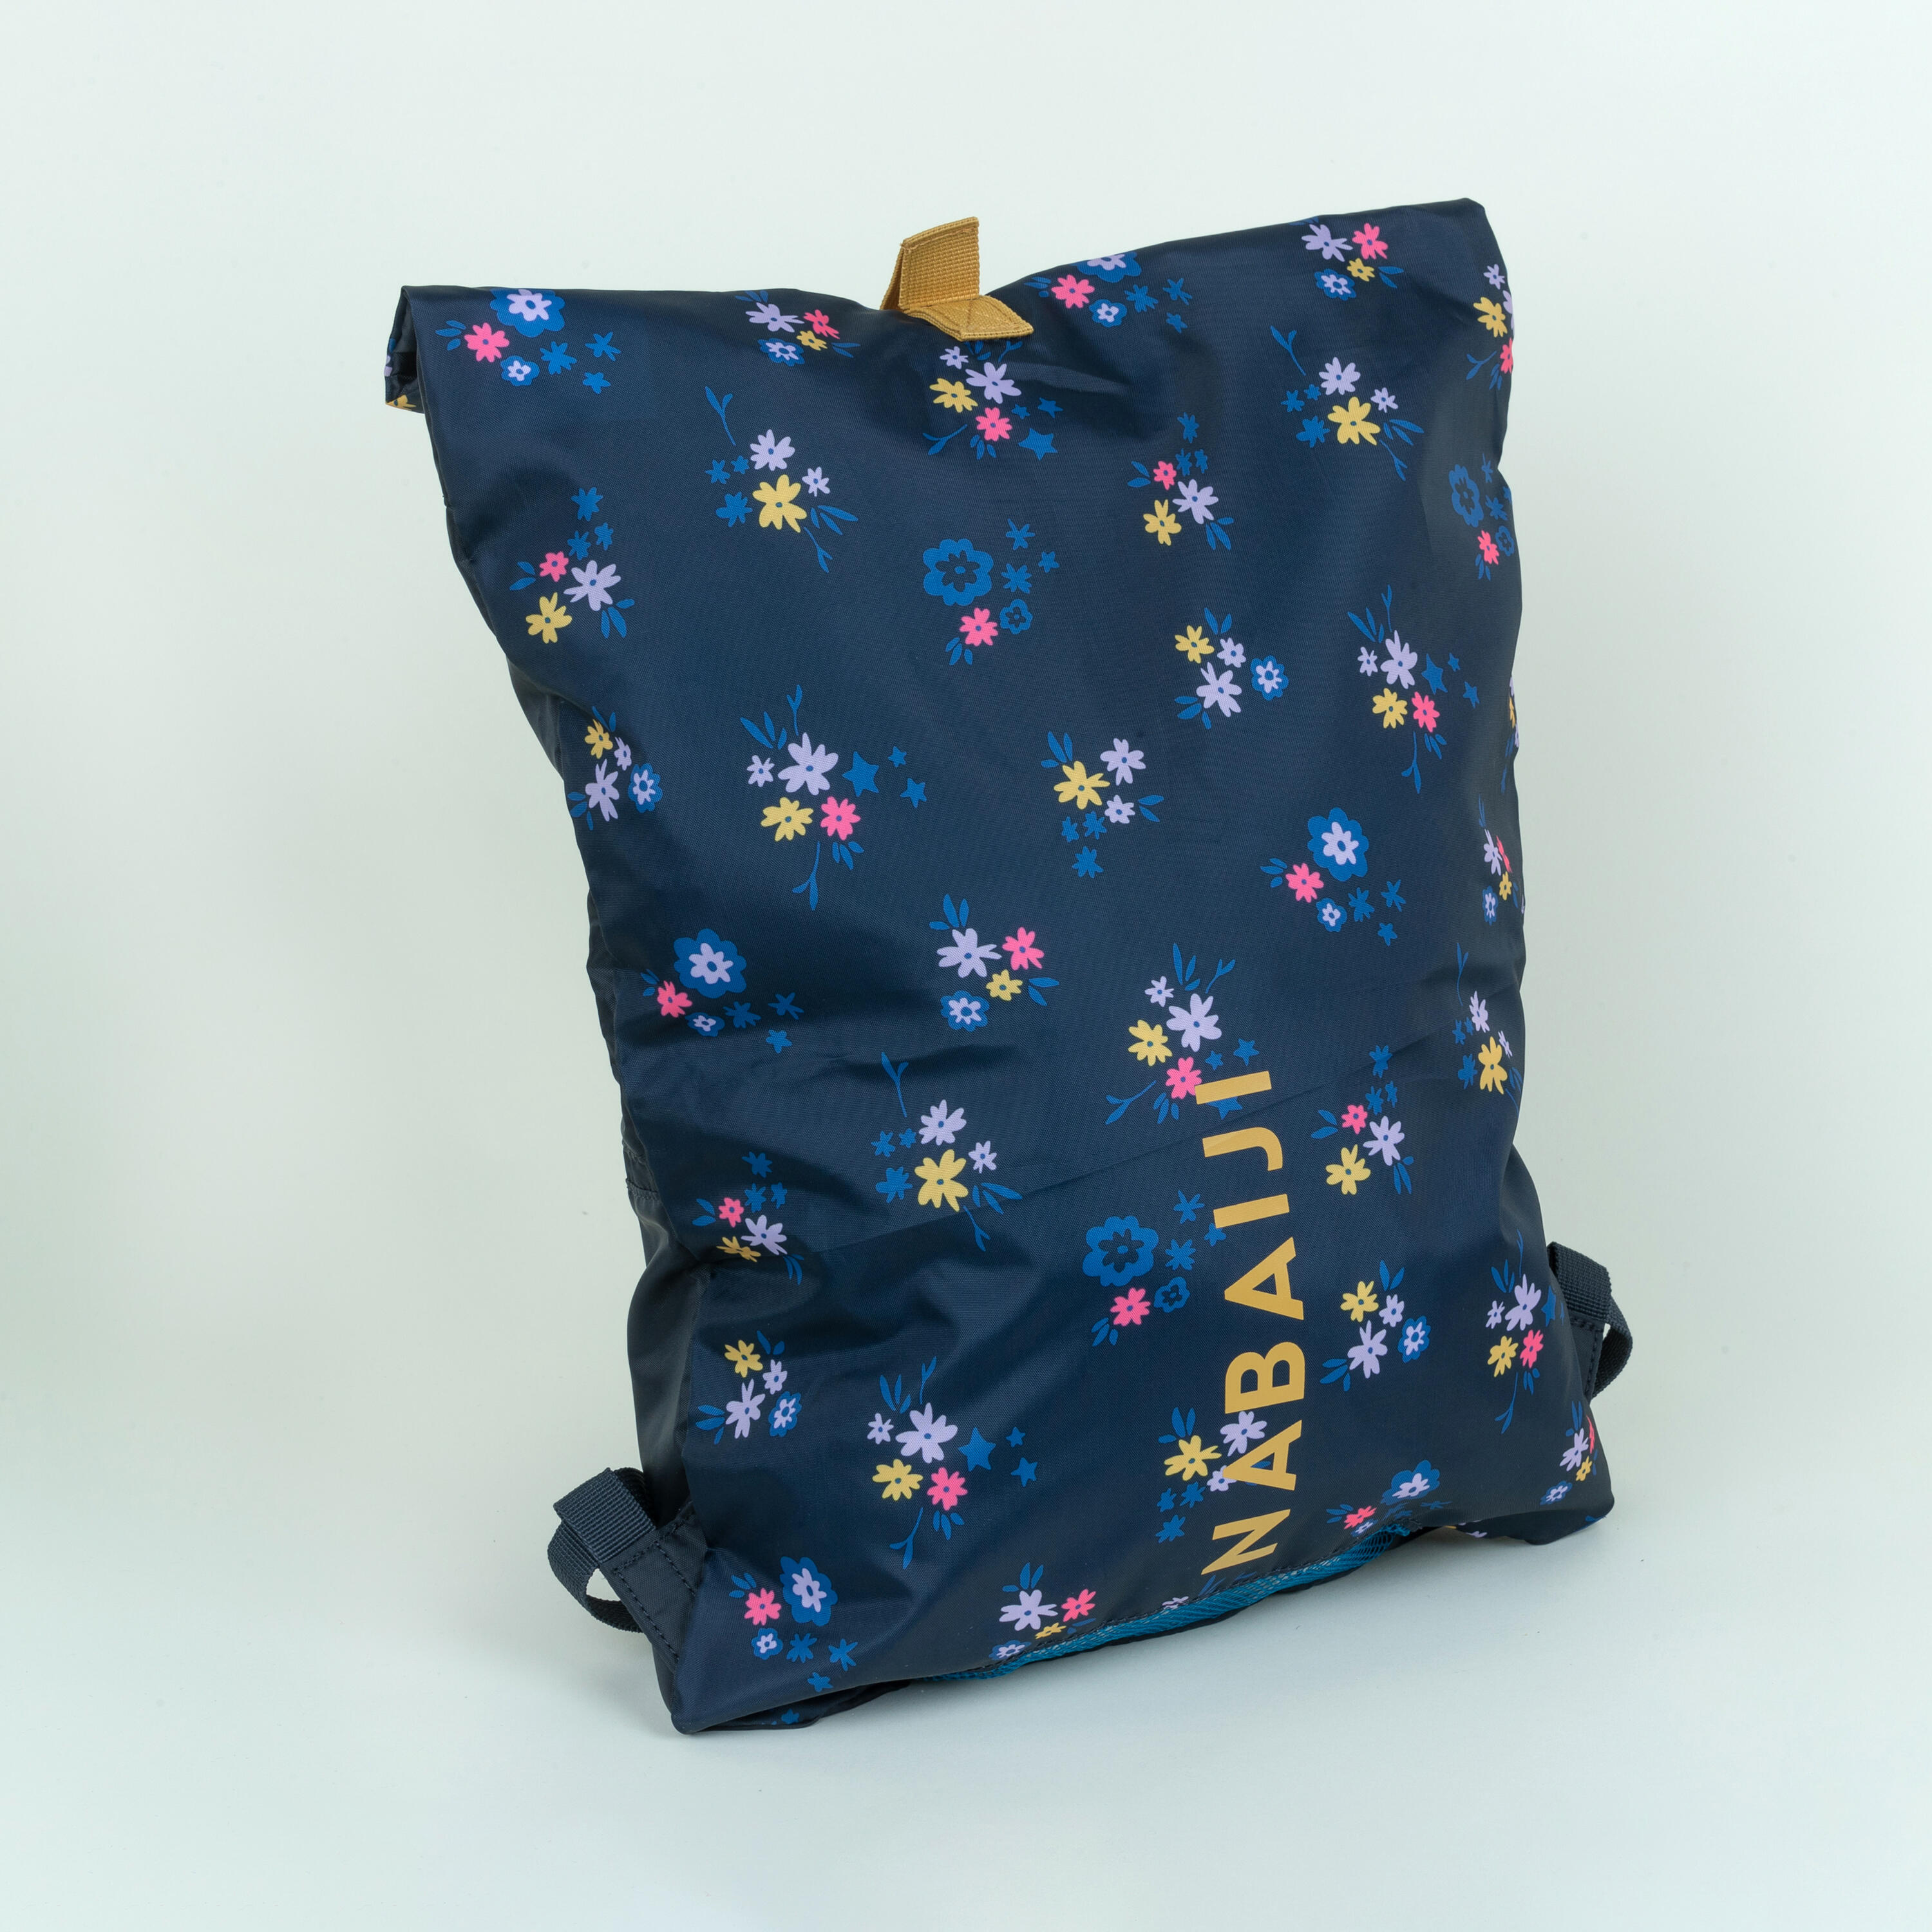 Swimming backpack Lighty Lily navy 1/6